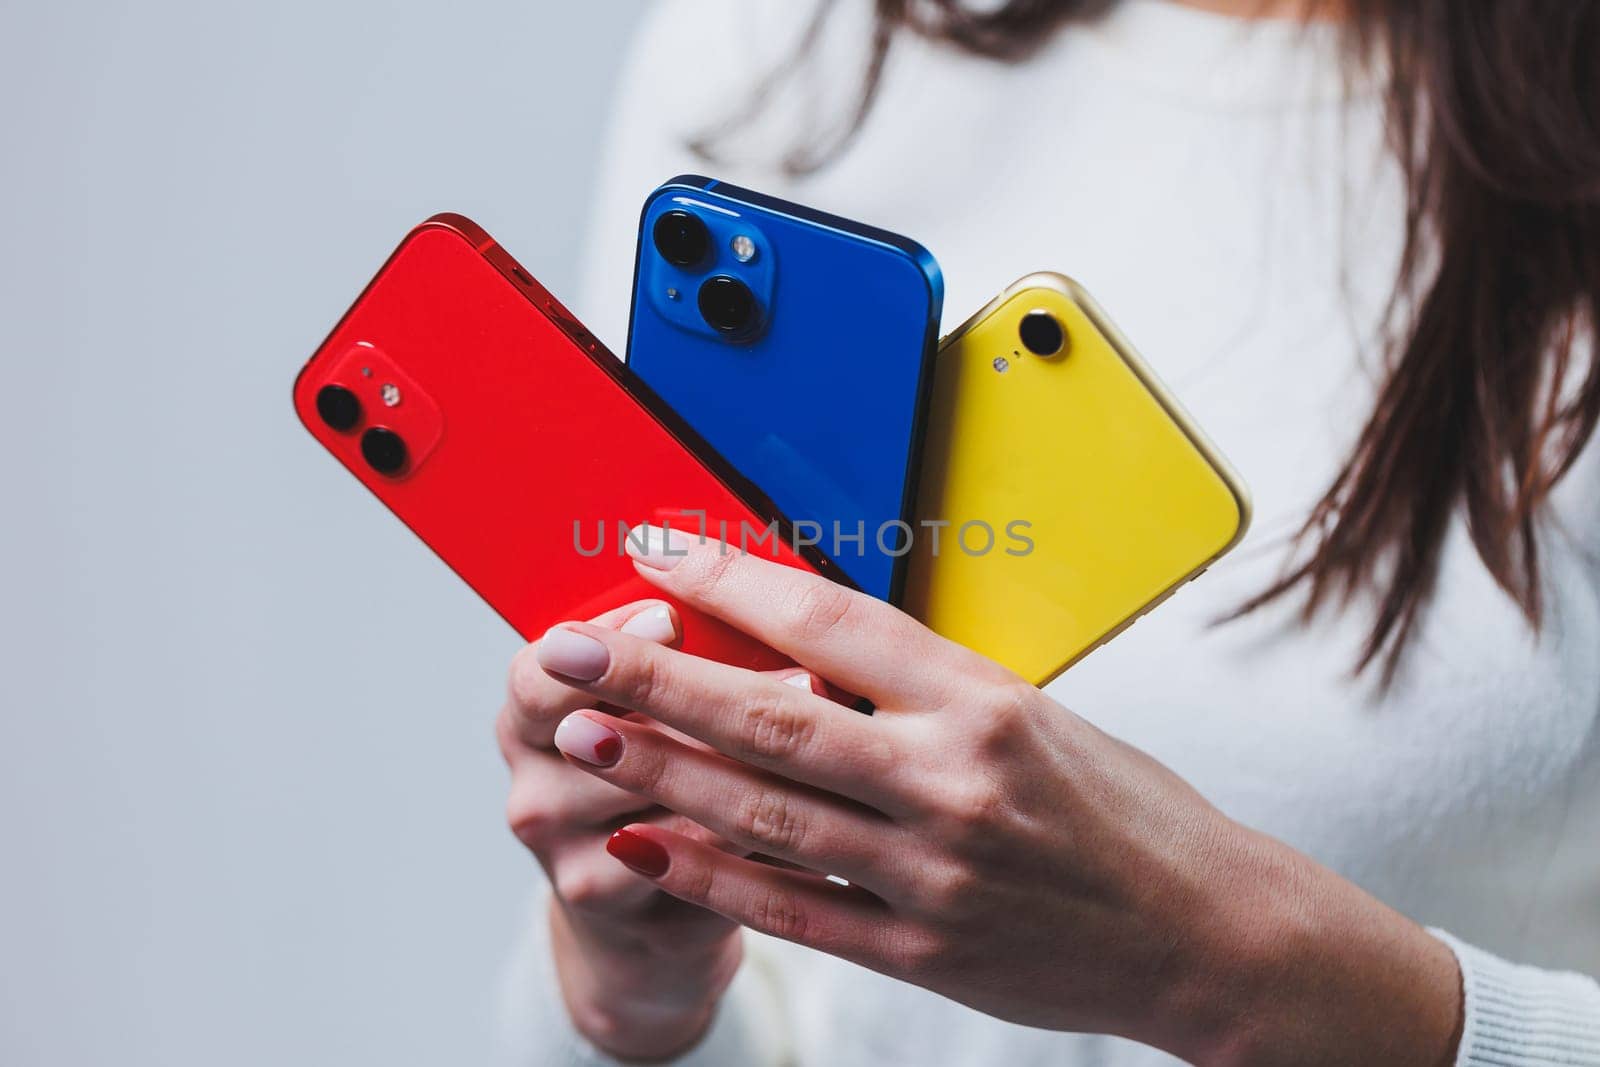 New bright phones in the hands of a woman. Hands of a woman holding several smartphones.